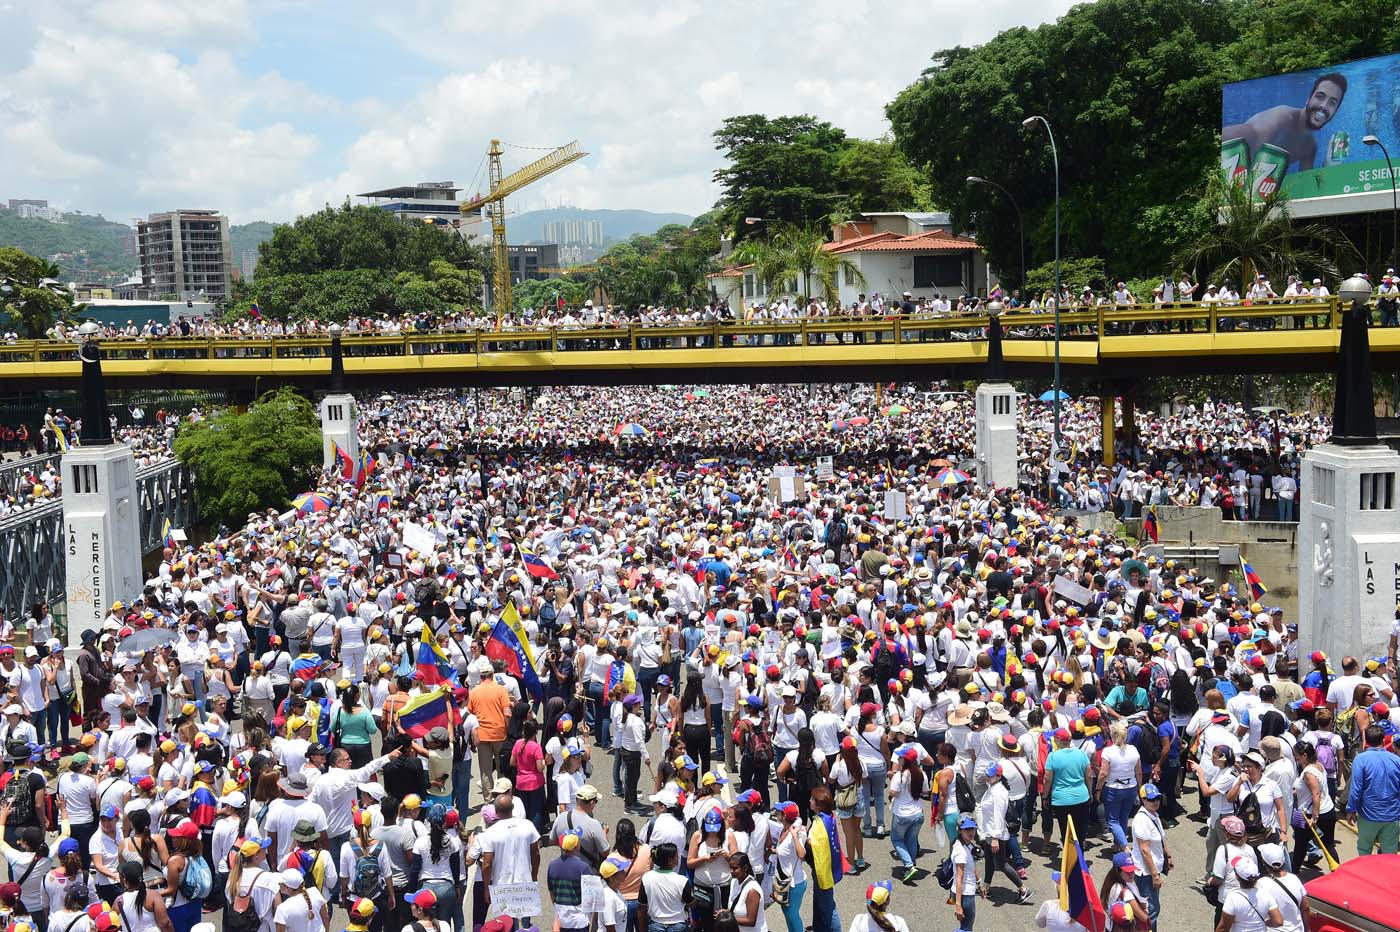 Venezuelan opposition activists take part in a women's march aimed to keep pressure on President Nicolas Maduro, whose authority is being increasingly challenged by protests and deadly unrest, in Caracas on May 6, 2017. The death toll since April, when the protests intensified after Maduro's administration and the courts stepped up efforts to undermine the opposition, is at least 36 according to prosecutors. / AFP PHOTO / RONALDO SCHEMIDT